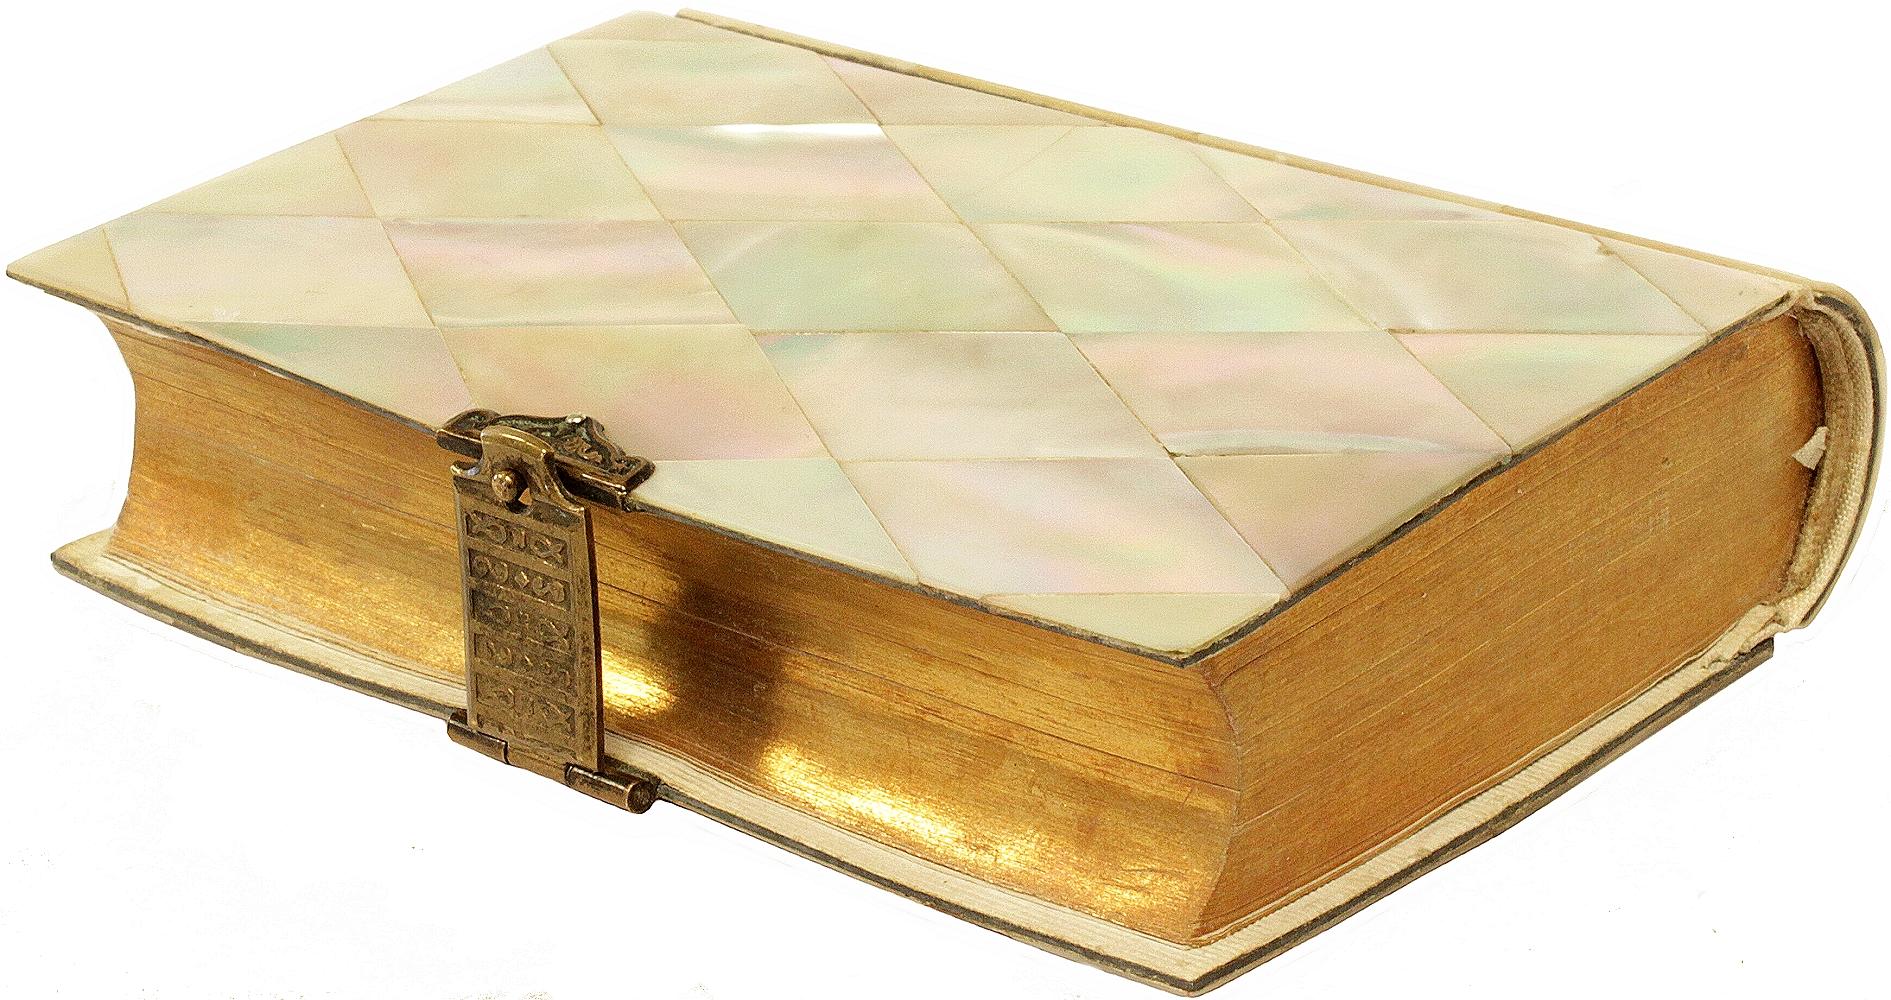 British [MISSAL]. Paroissien romain contenant les offices. IN A MOTHER-OF-PEARL BINDING For Sale